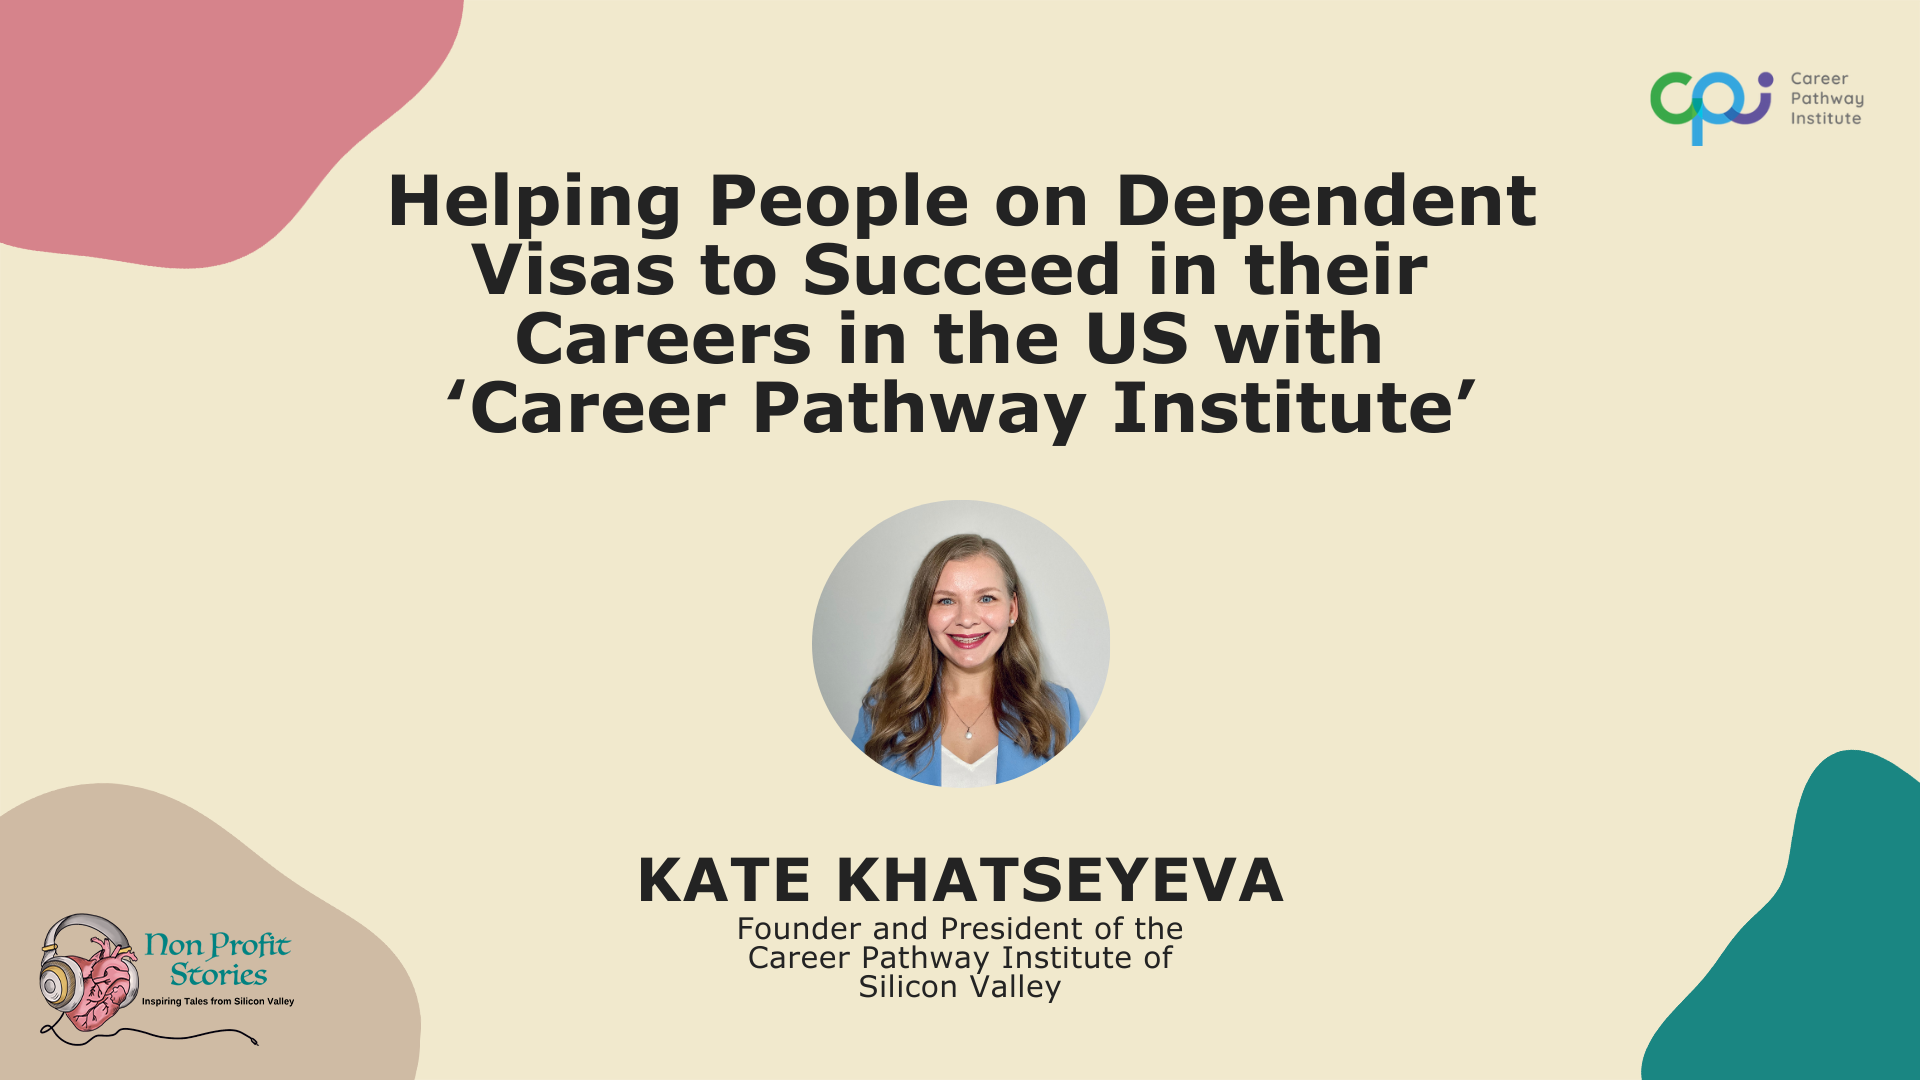 Helping People on Dependent Visas to Succeed in their Careers in the US with ‘Career Pathway Institute’ Video